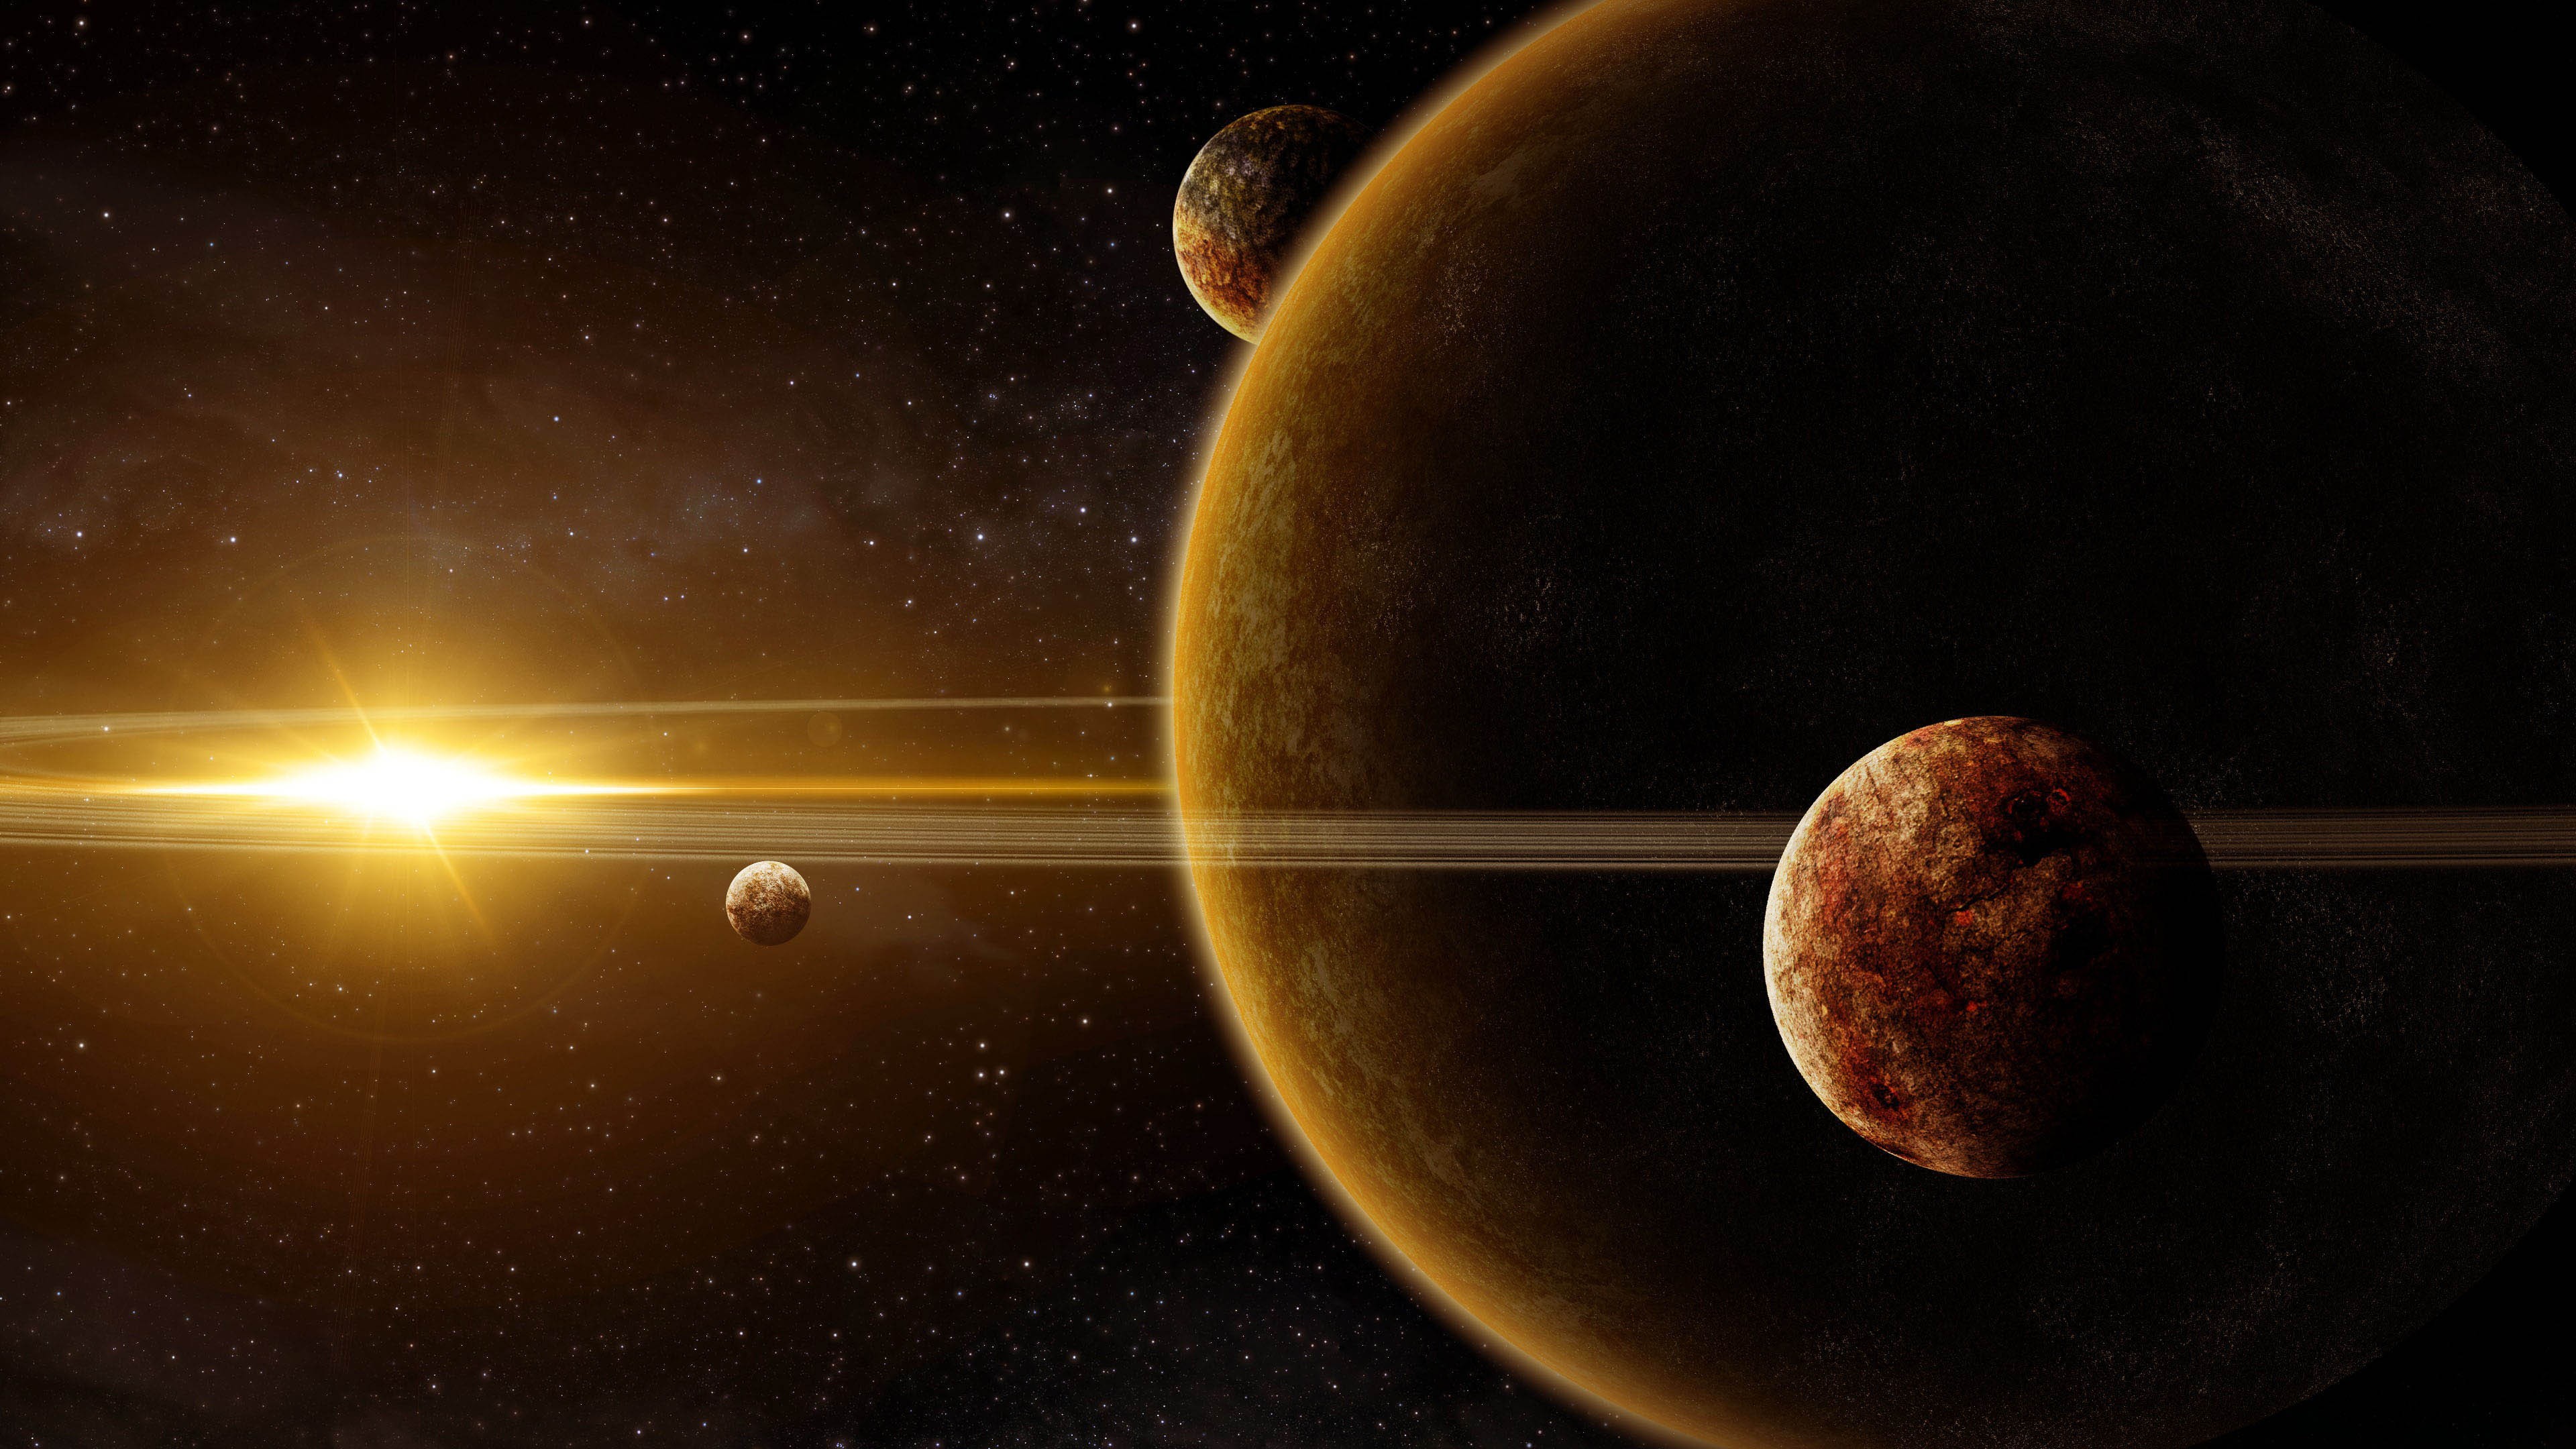  The Solar System HD Wallpapers Space Nature Wallpaper Full Free Download